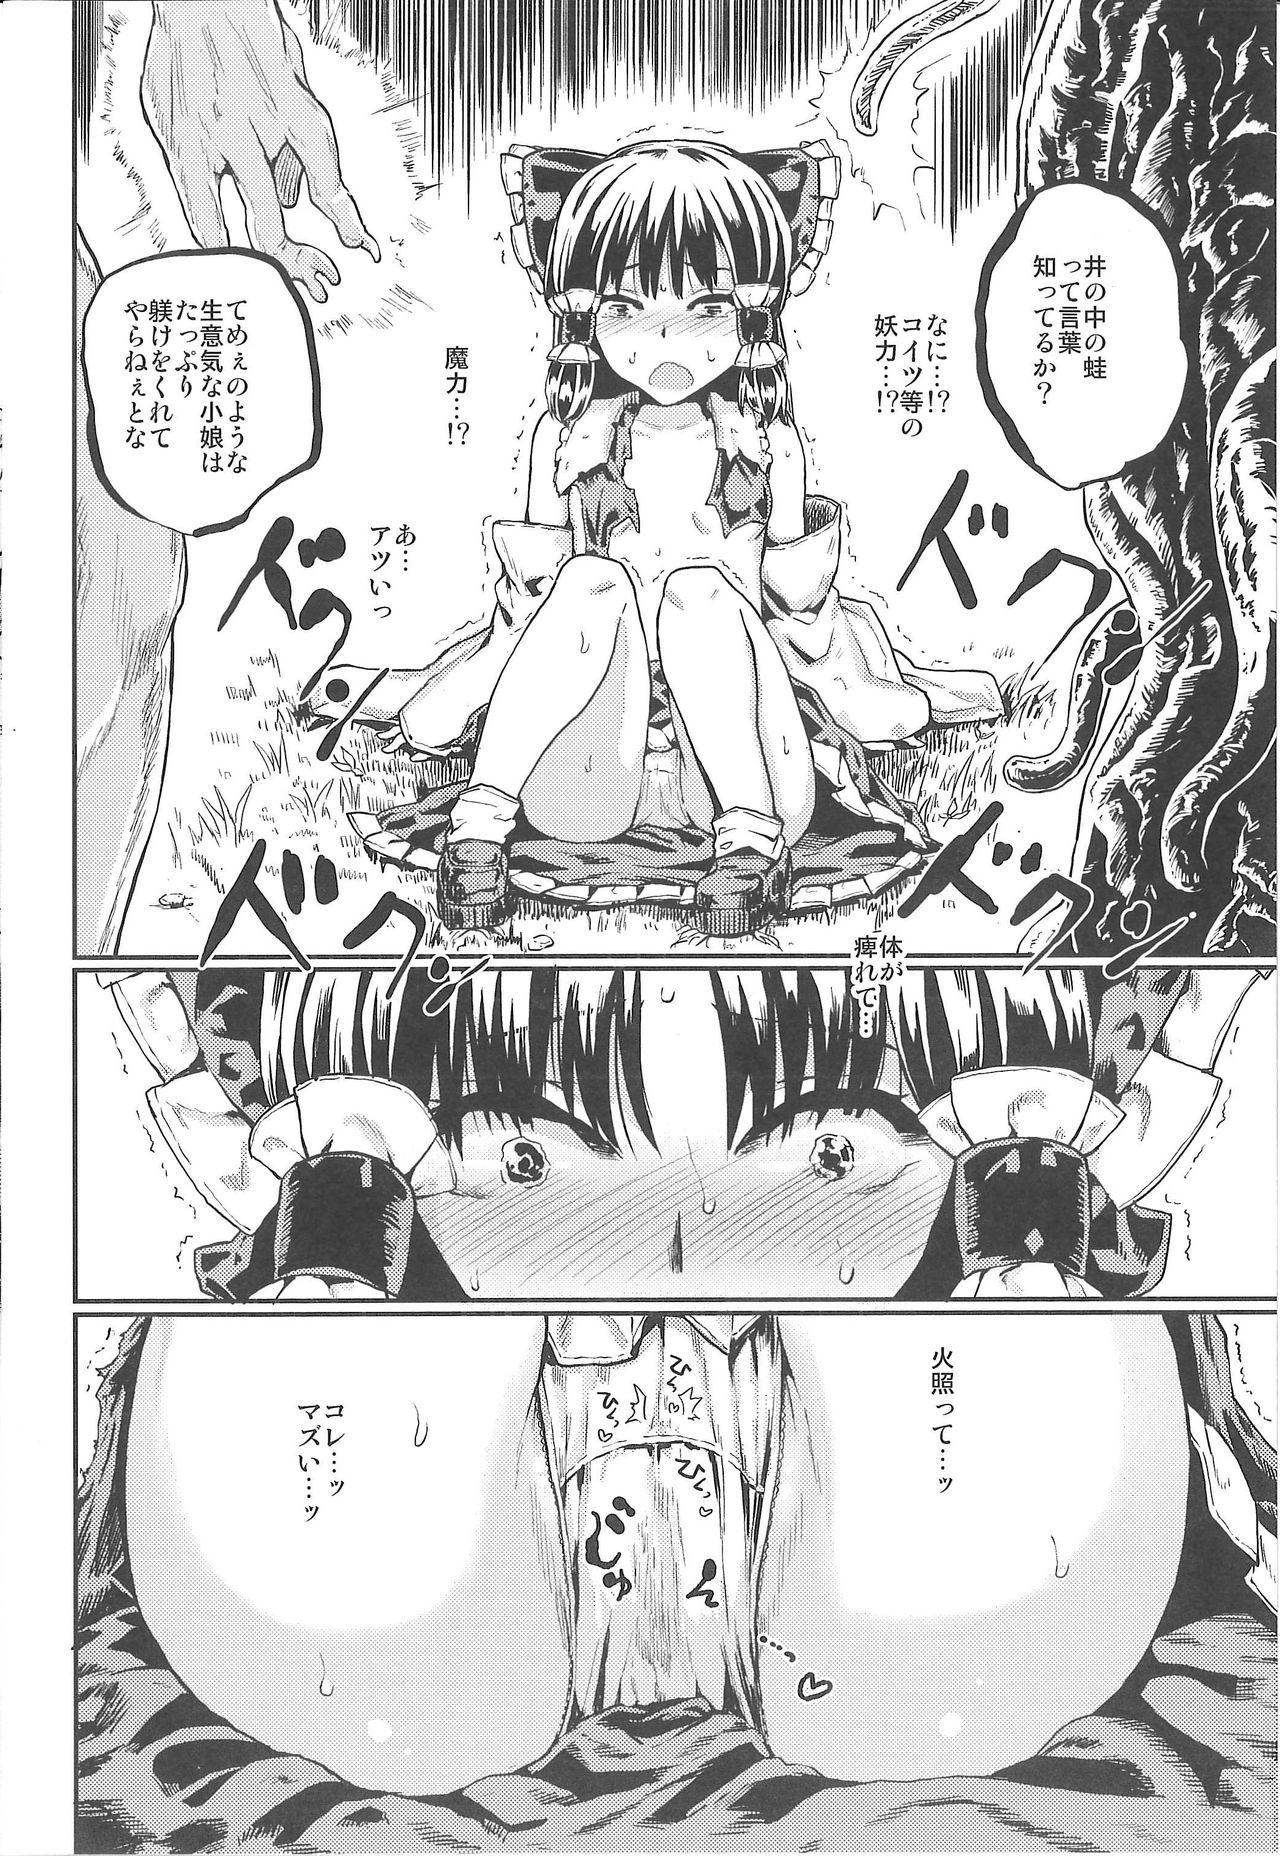 Shecock REFORM EDEN - Touhou project Swallowing - Page 3